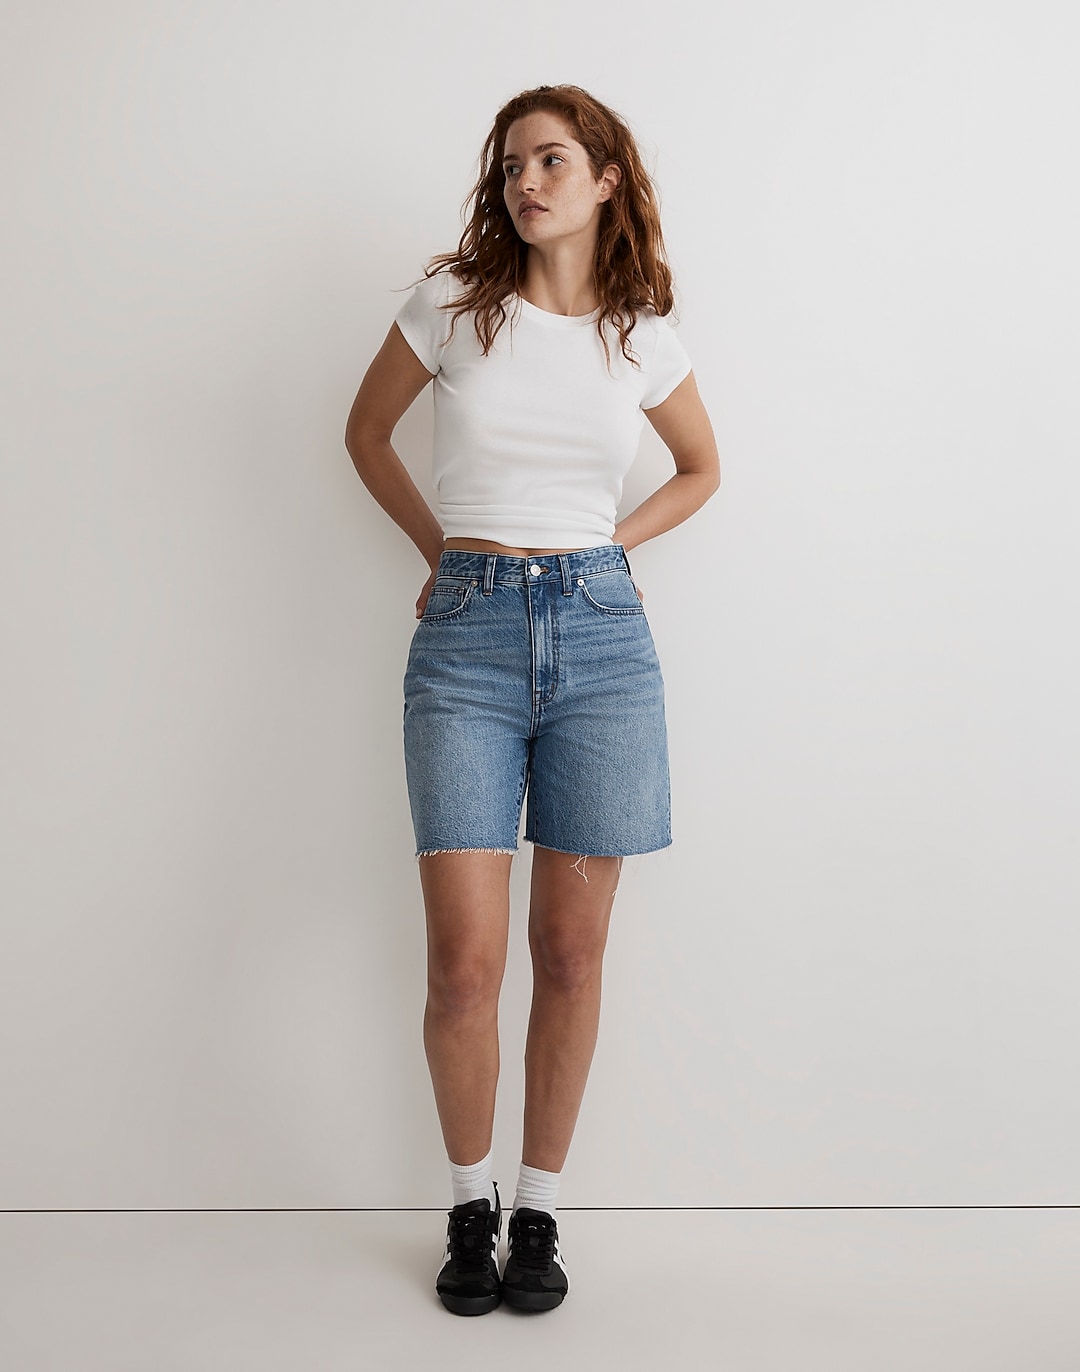 Curvy Baggy Jean Shorts in Crestford Wash | Madewell